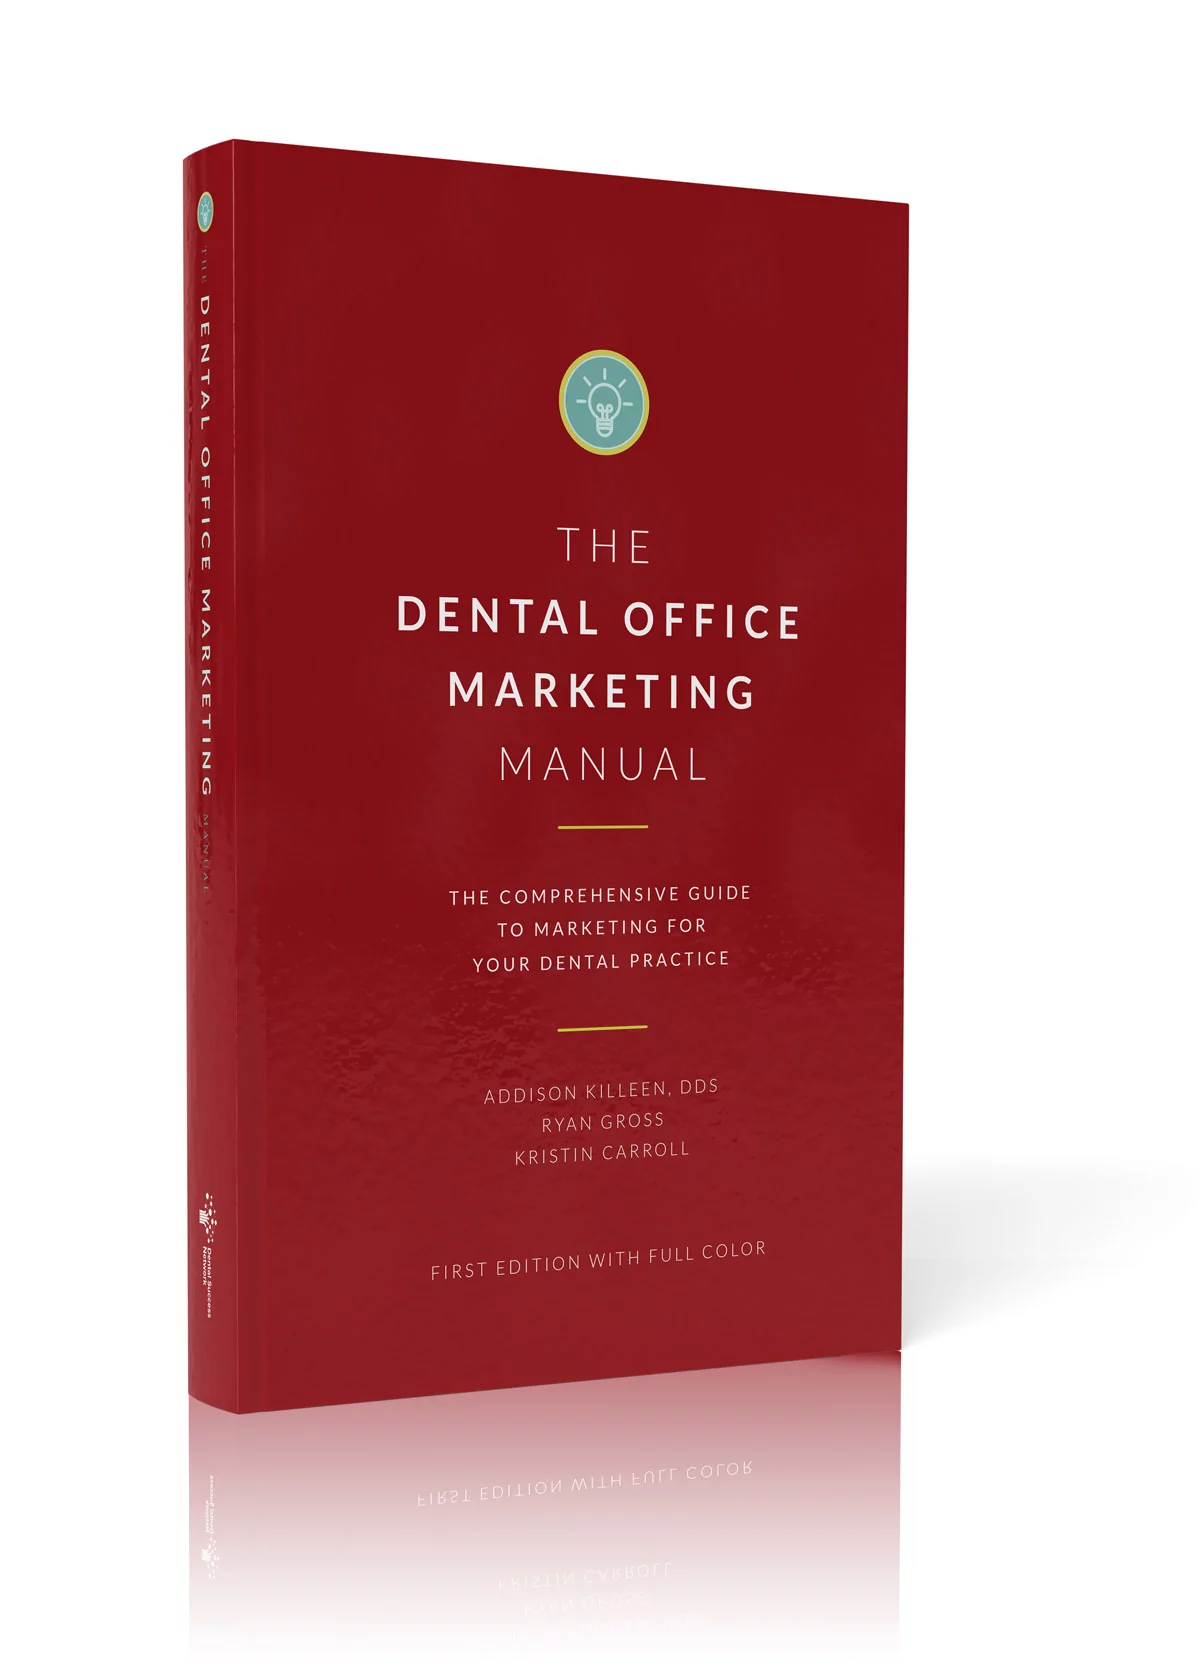 The Dental Office Marketing Manual book cover